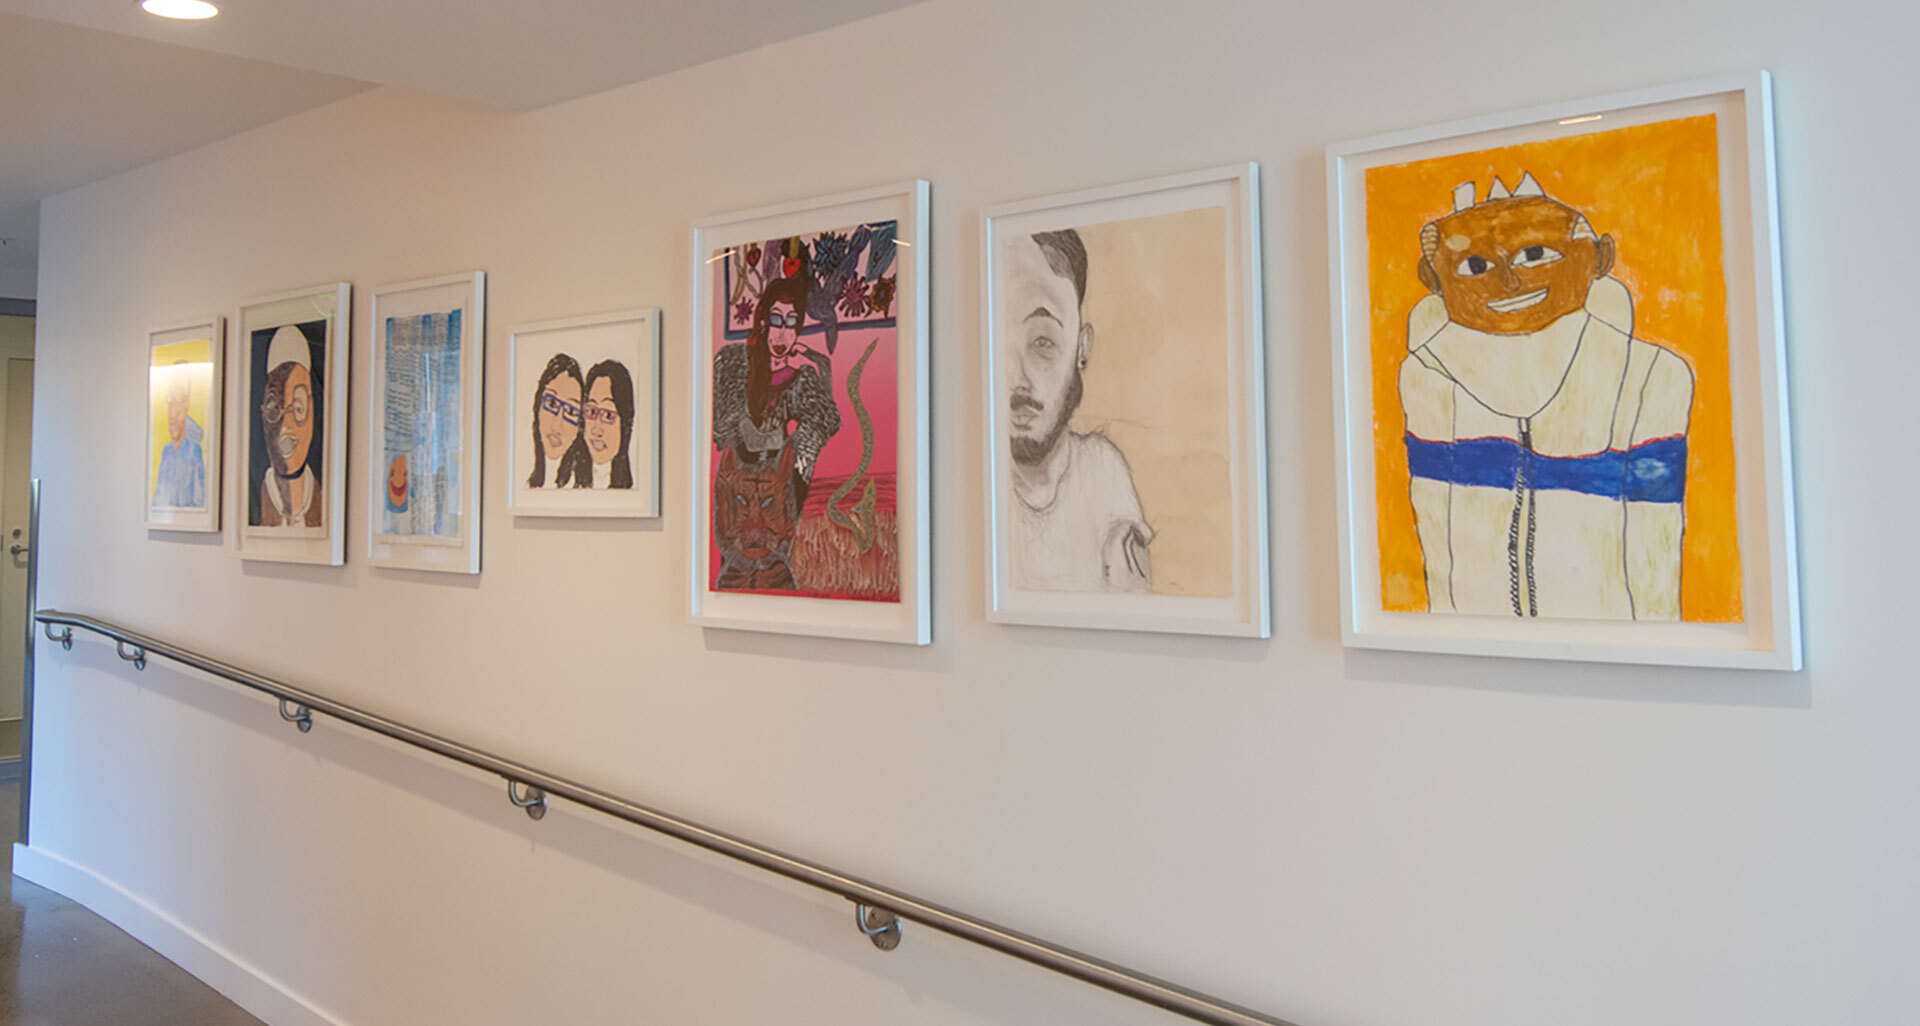 Selection of 7 self-portraits by Creativity Explored installed in the lower lobby corridor of KQED.